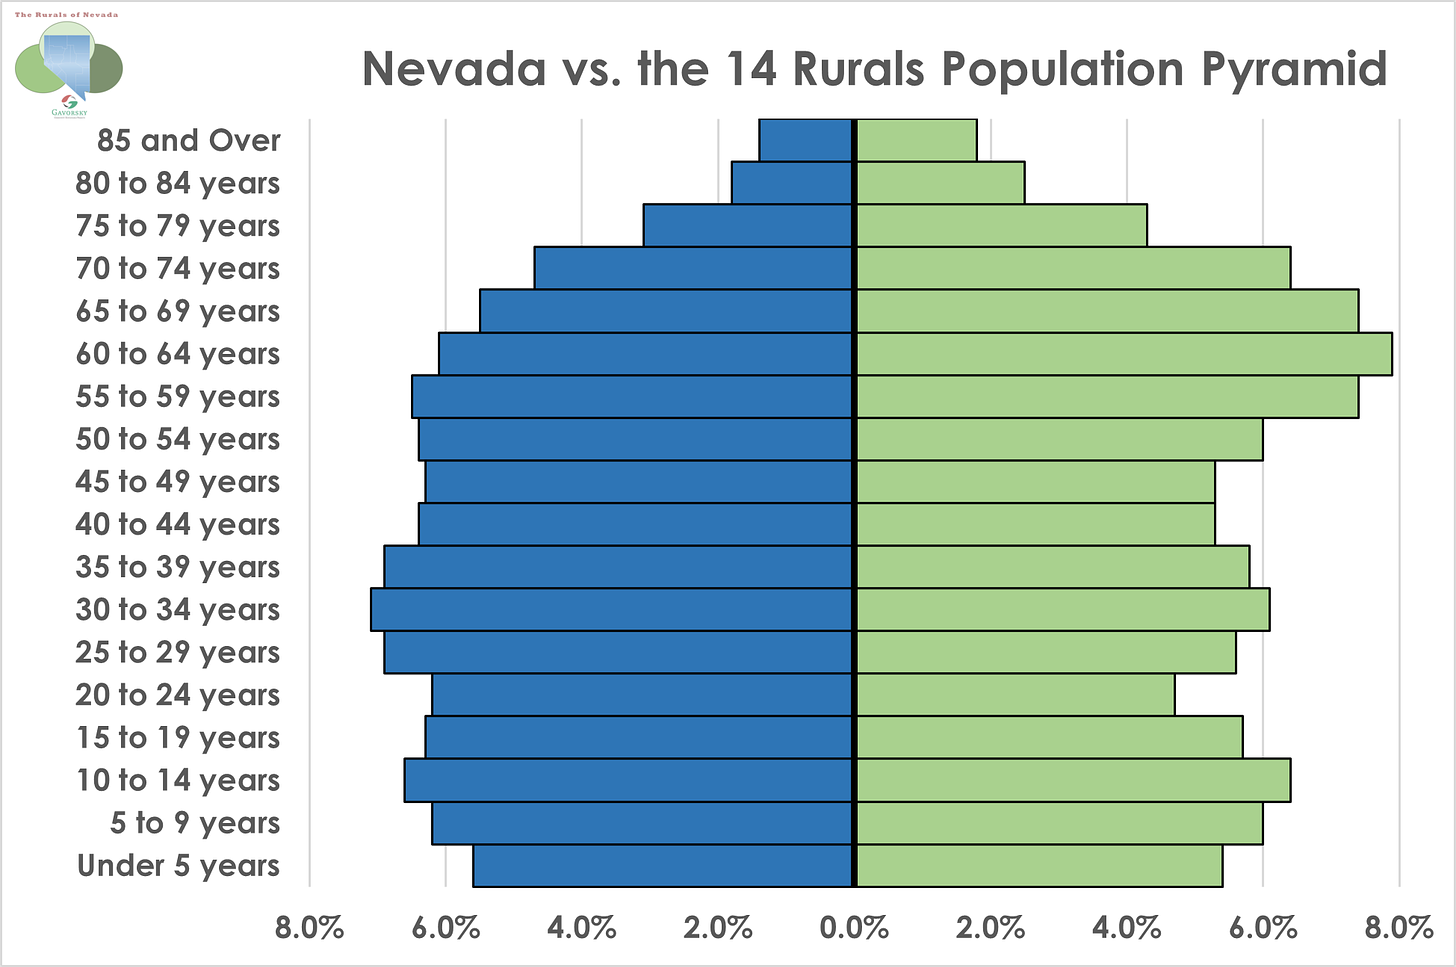 Population Pyramid comparing state of Nevada on left to the fourteen rural Nevada counties on the right. Detailed discussion in paragraph below.